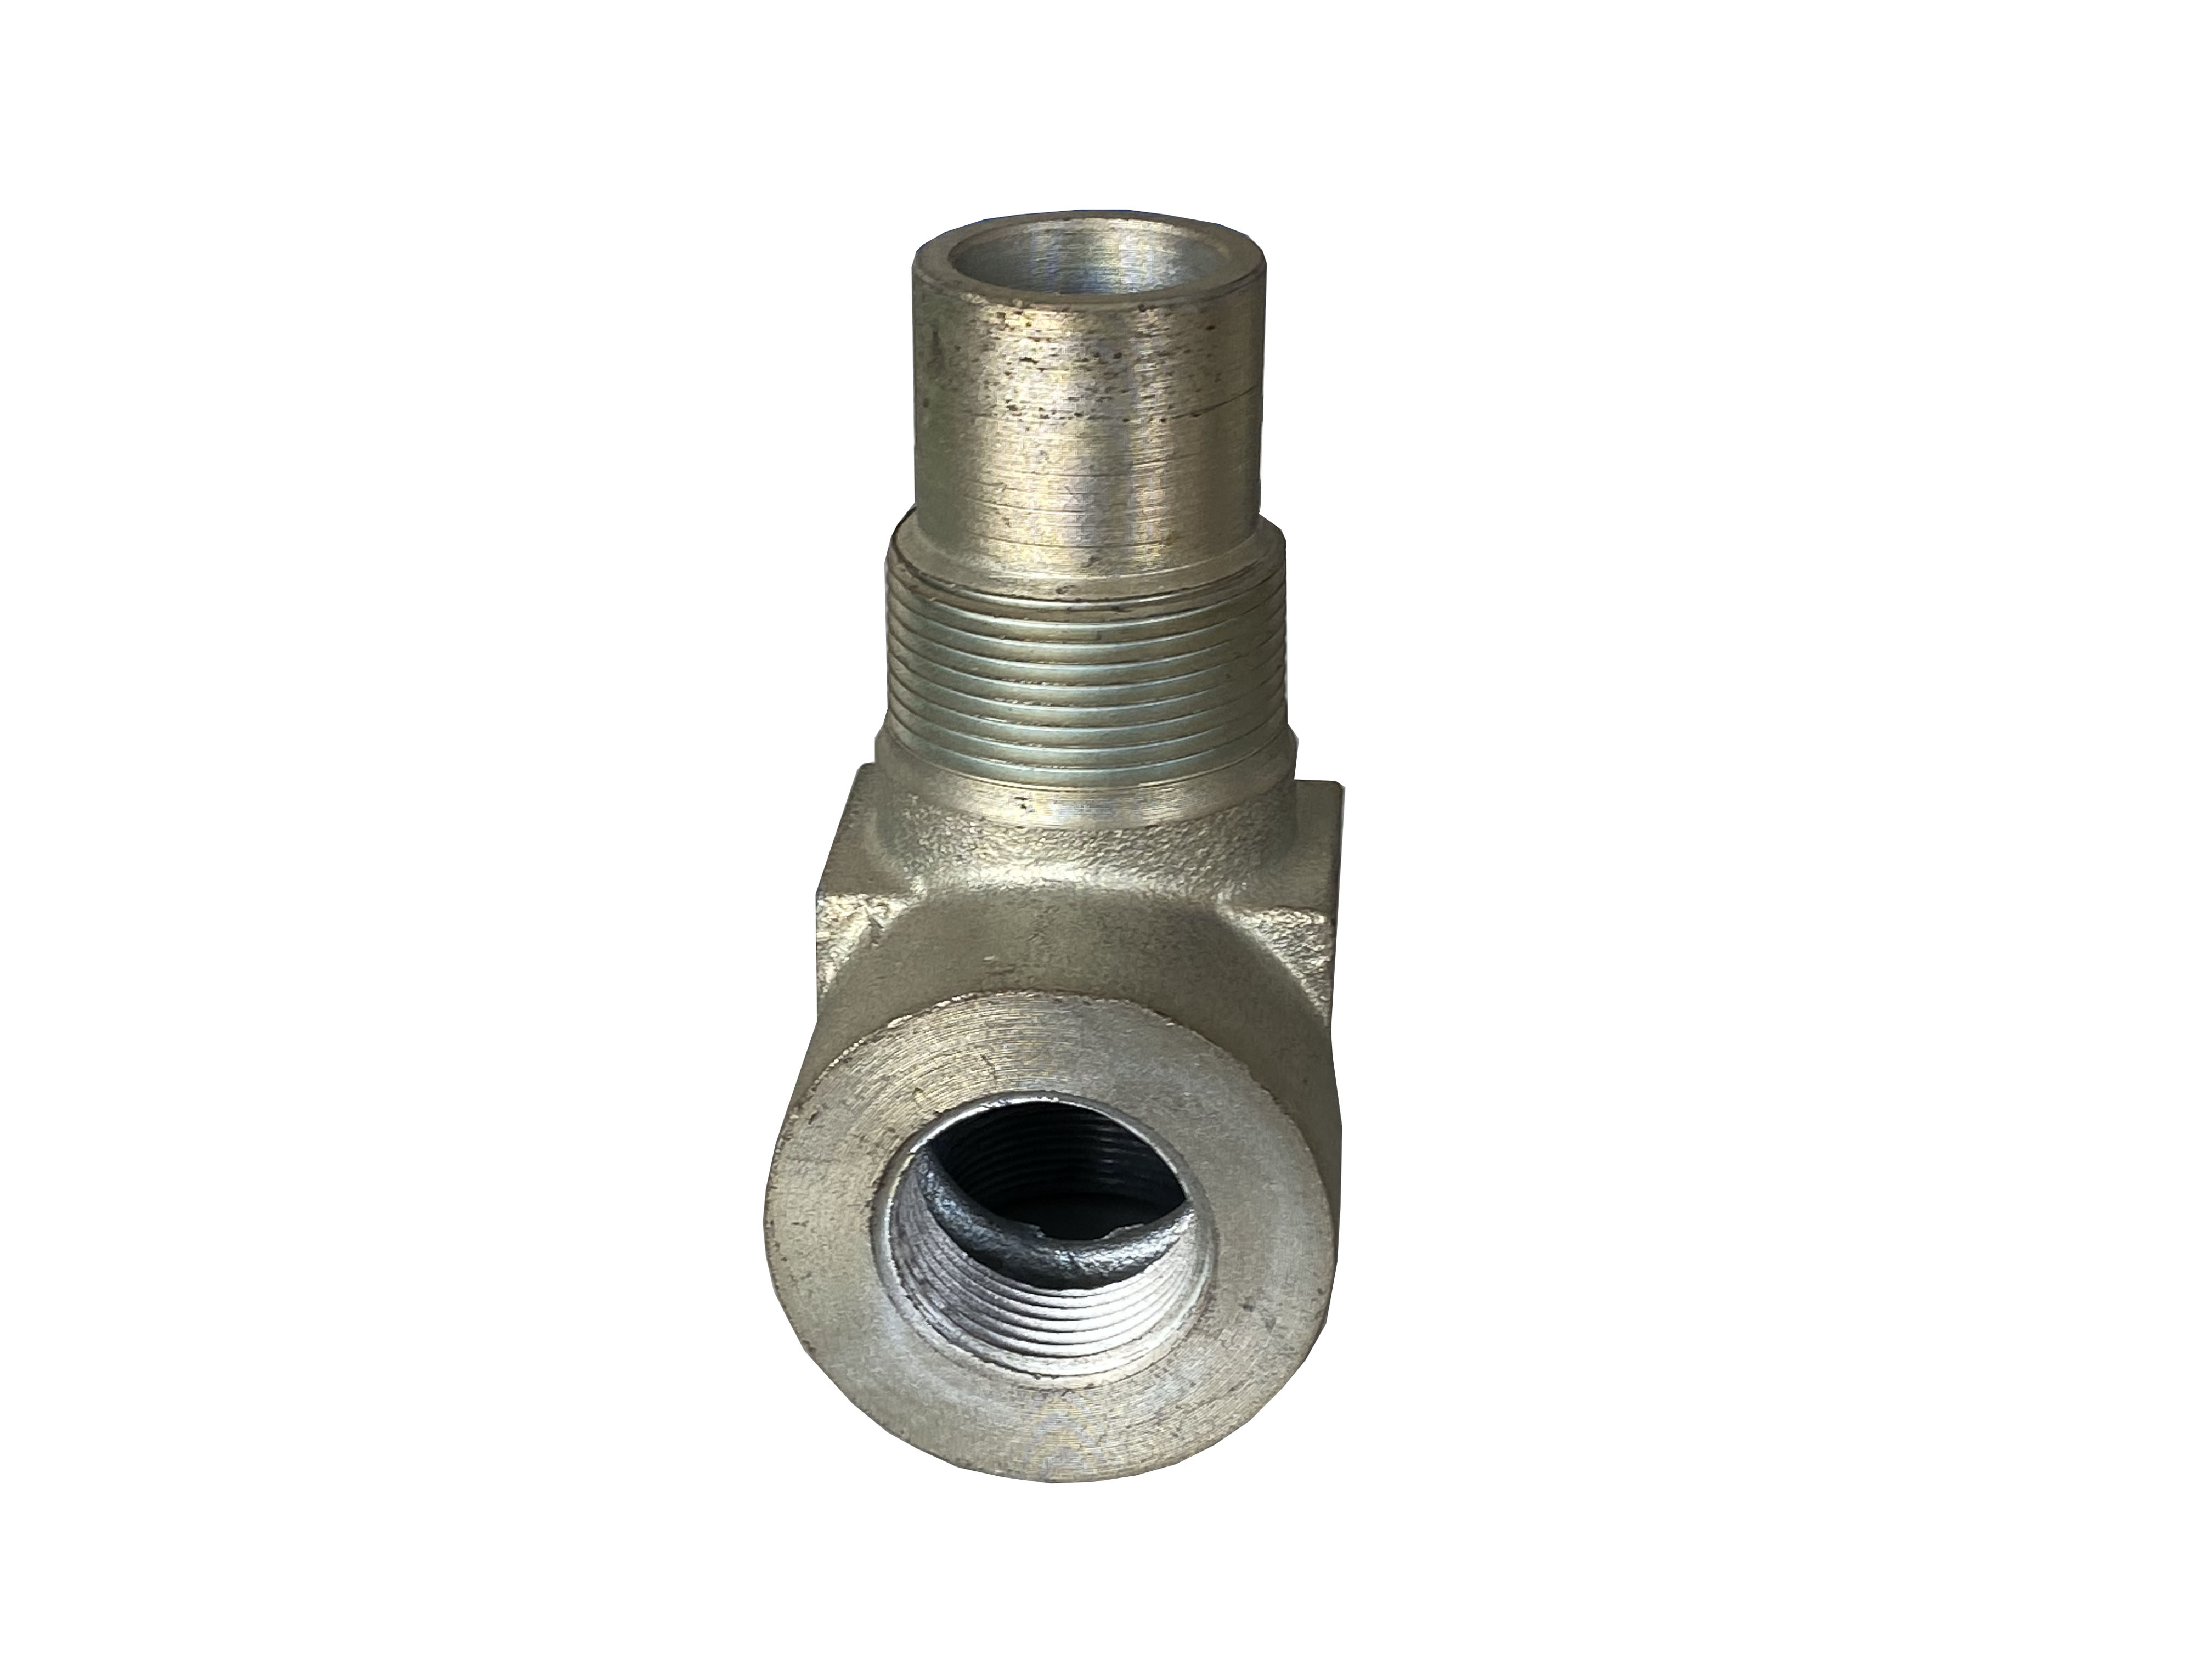 Custom Made Made Casting Casting Casting Casting Lost Parting Parts Valve Parts